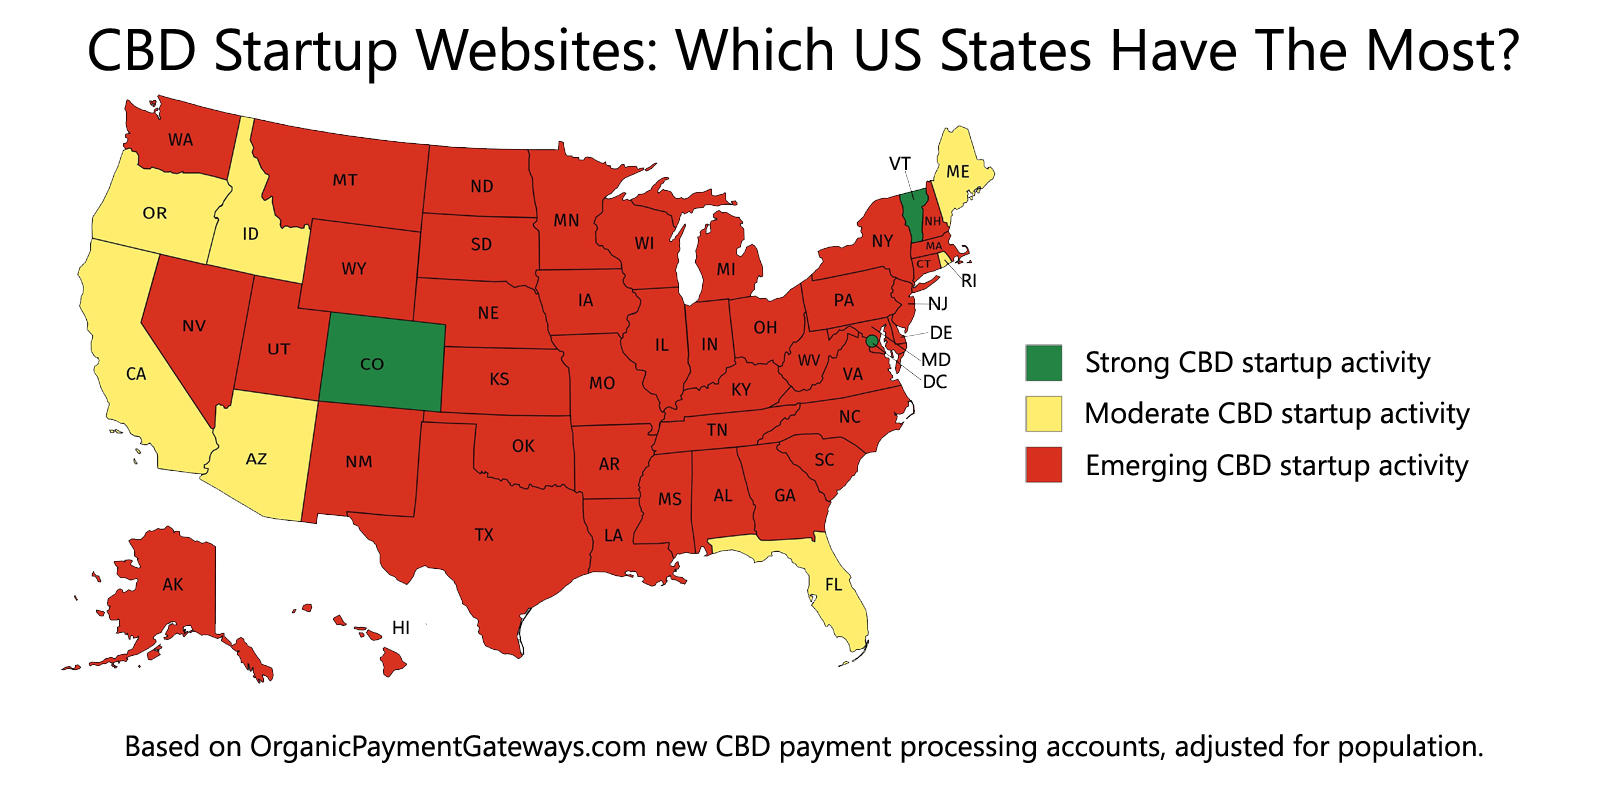 CBD Startup Websites: Which US States Have The Most?